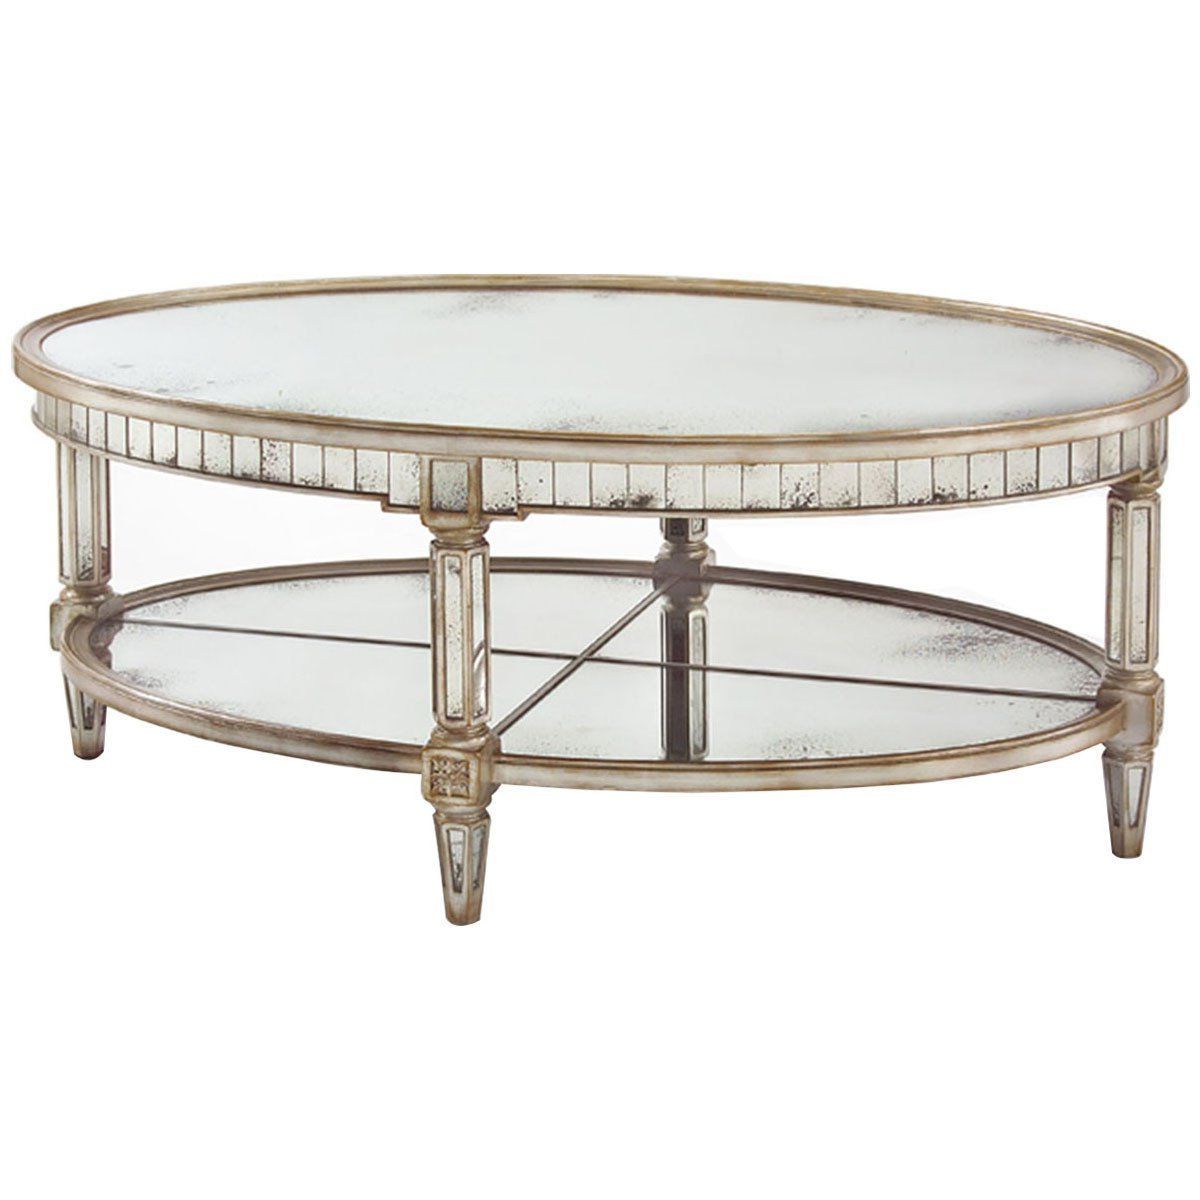 Most Current Antique Silver Metal Coffee Tables Inside John Richard Parisian Silver Keswick Oval Cocktail Table (View 12 of 20)